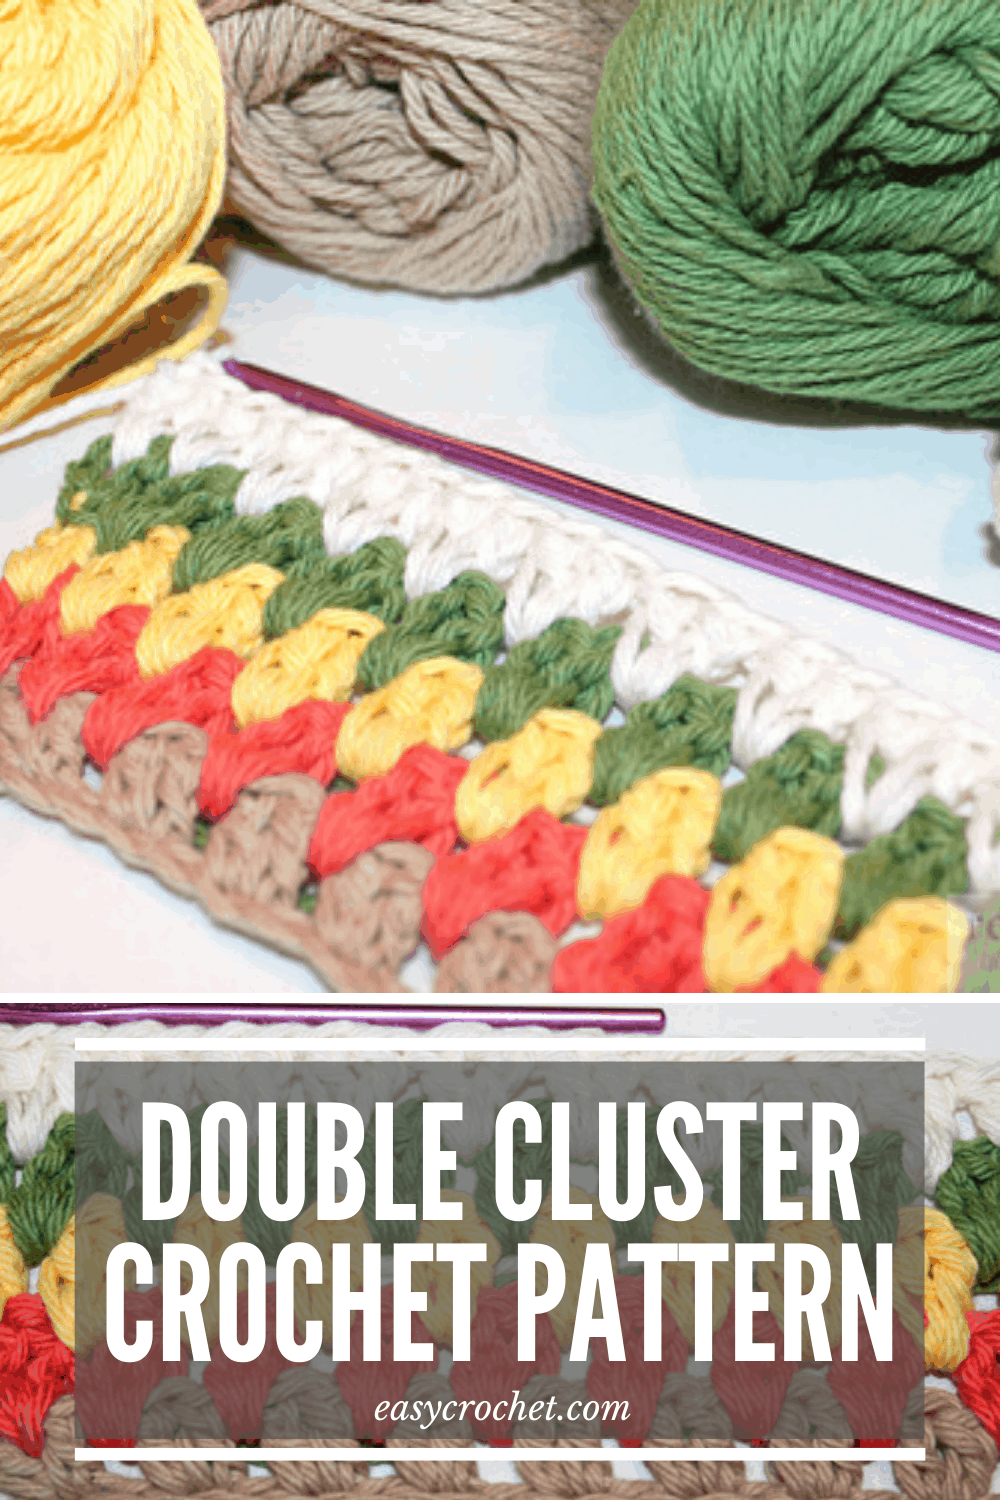 Free Double Crochet Cluster Stitch Tutorial - Use this stitch for crochet blankets, crochet washcloths and more! Free stitch pattern from Easy Crochet. via @easycrochetcom